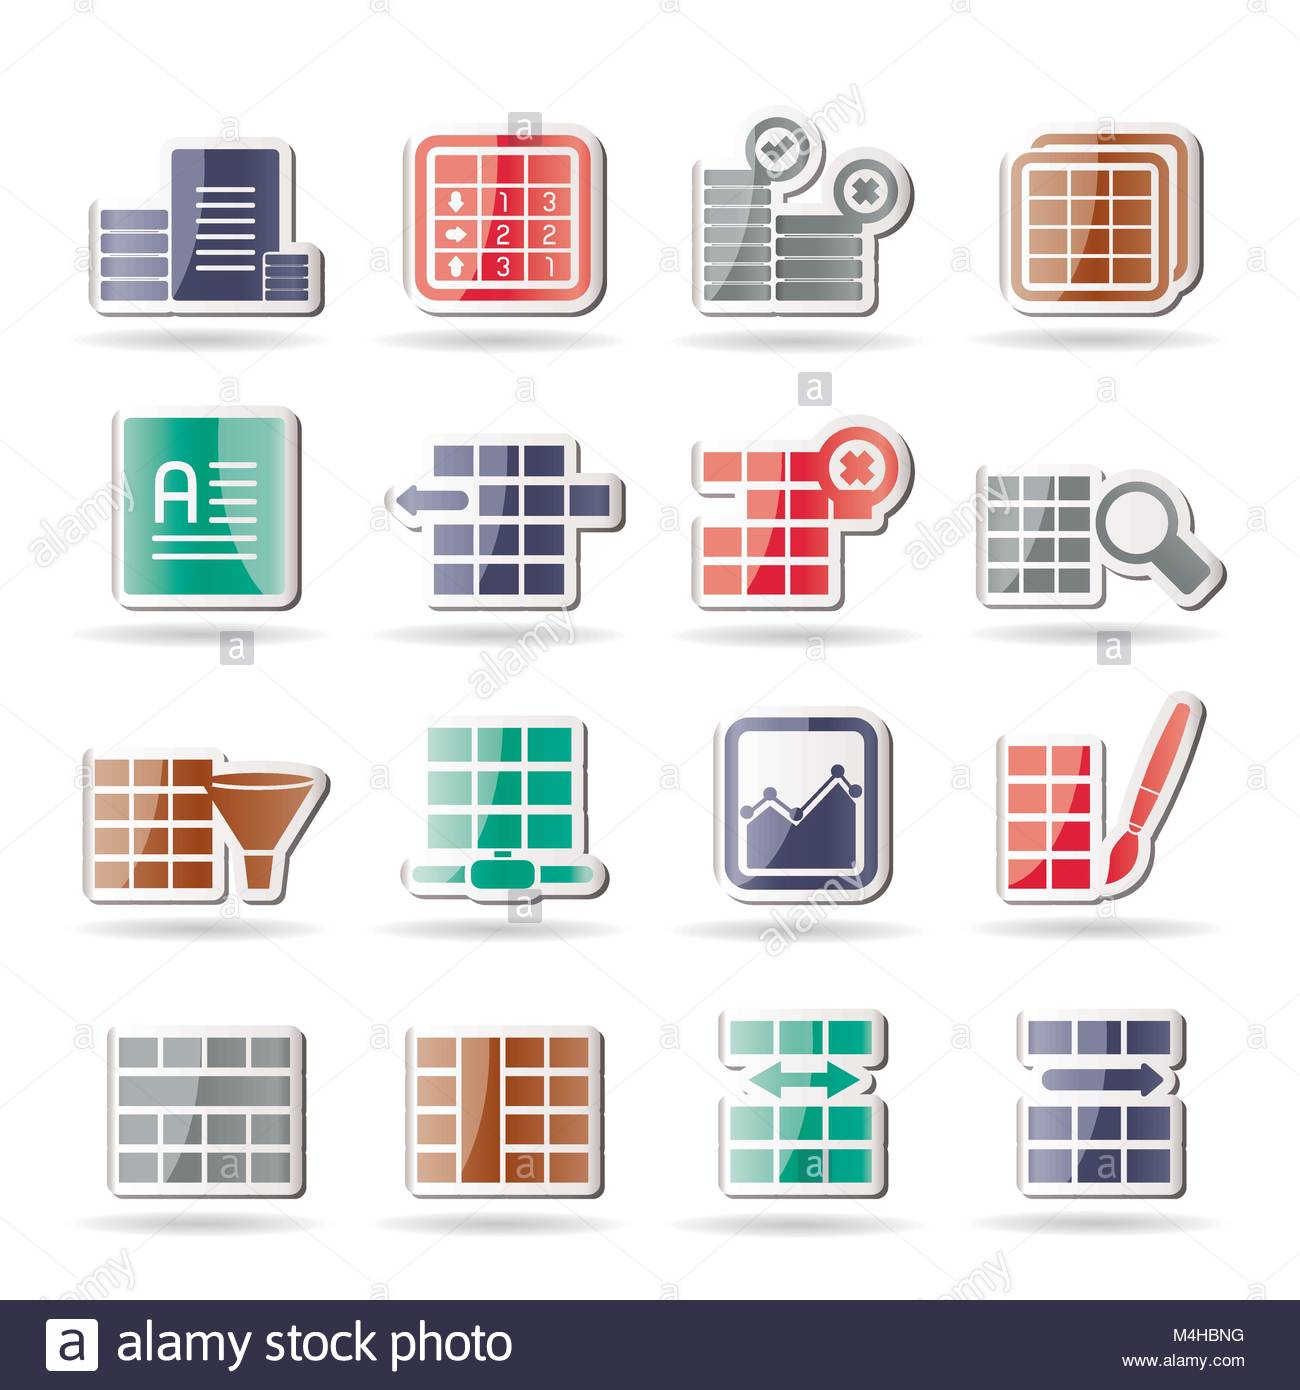 Quickoffice icons - Quickoffice Help